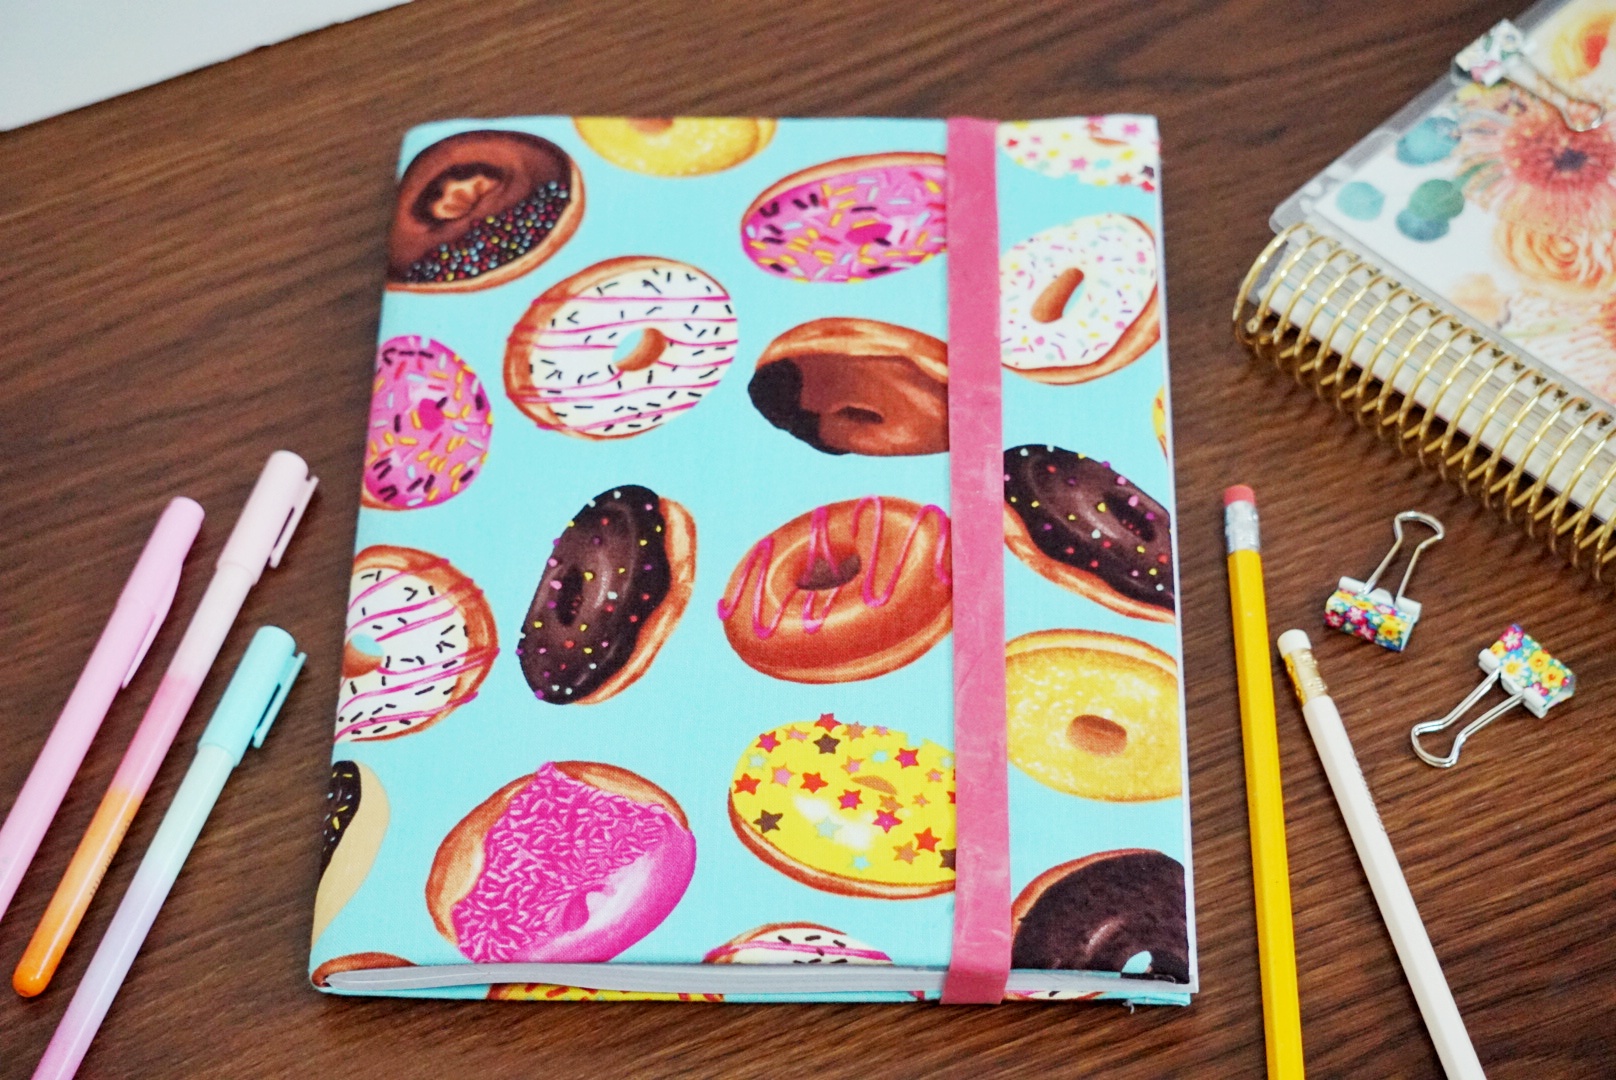 Turn Your Plain Notebook into a Cute Daily Journal